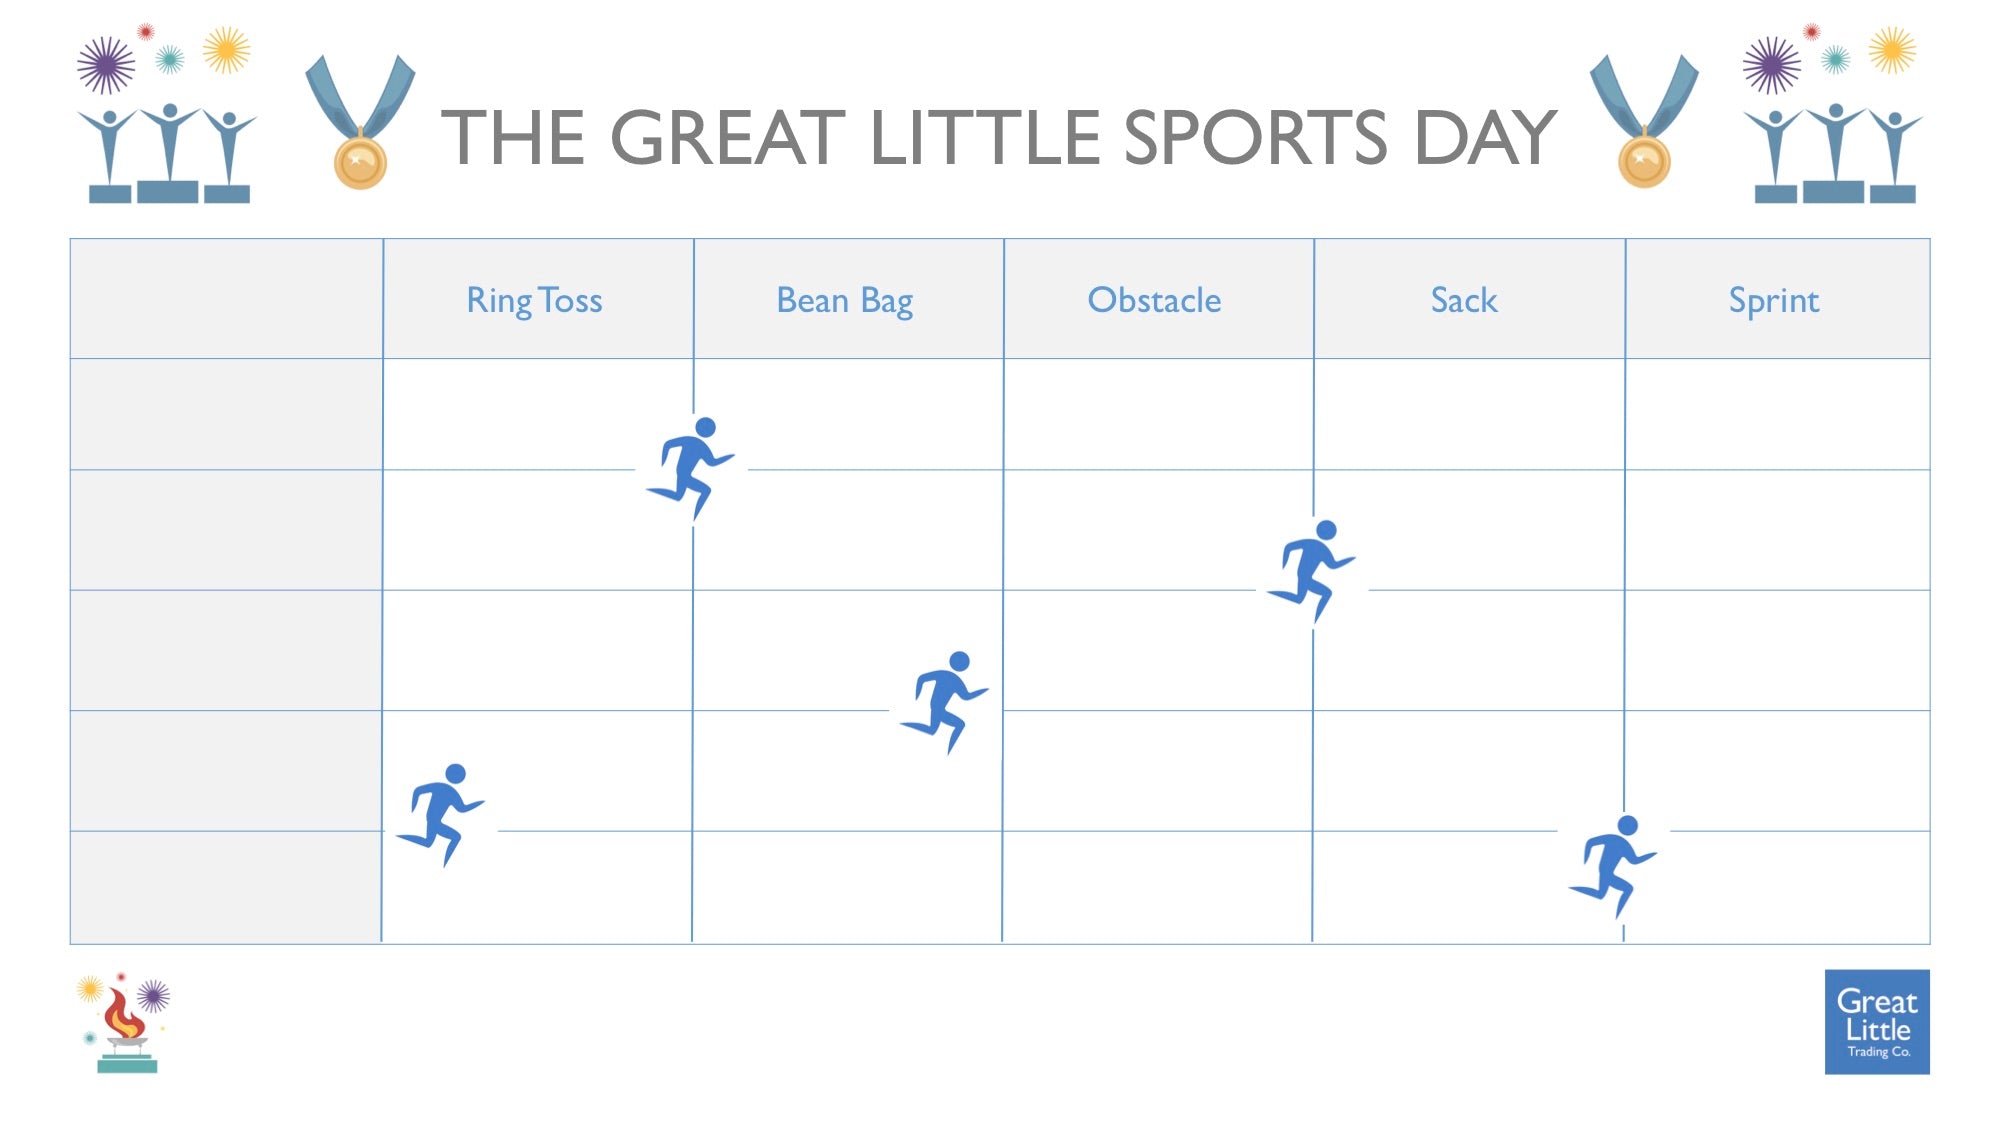 The Great Little Sports Day template